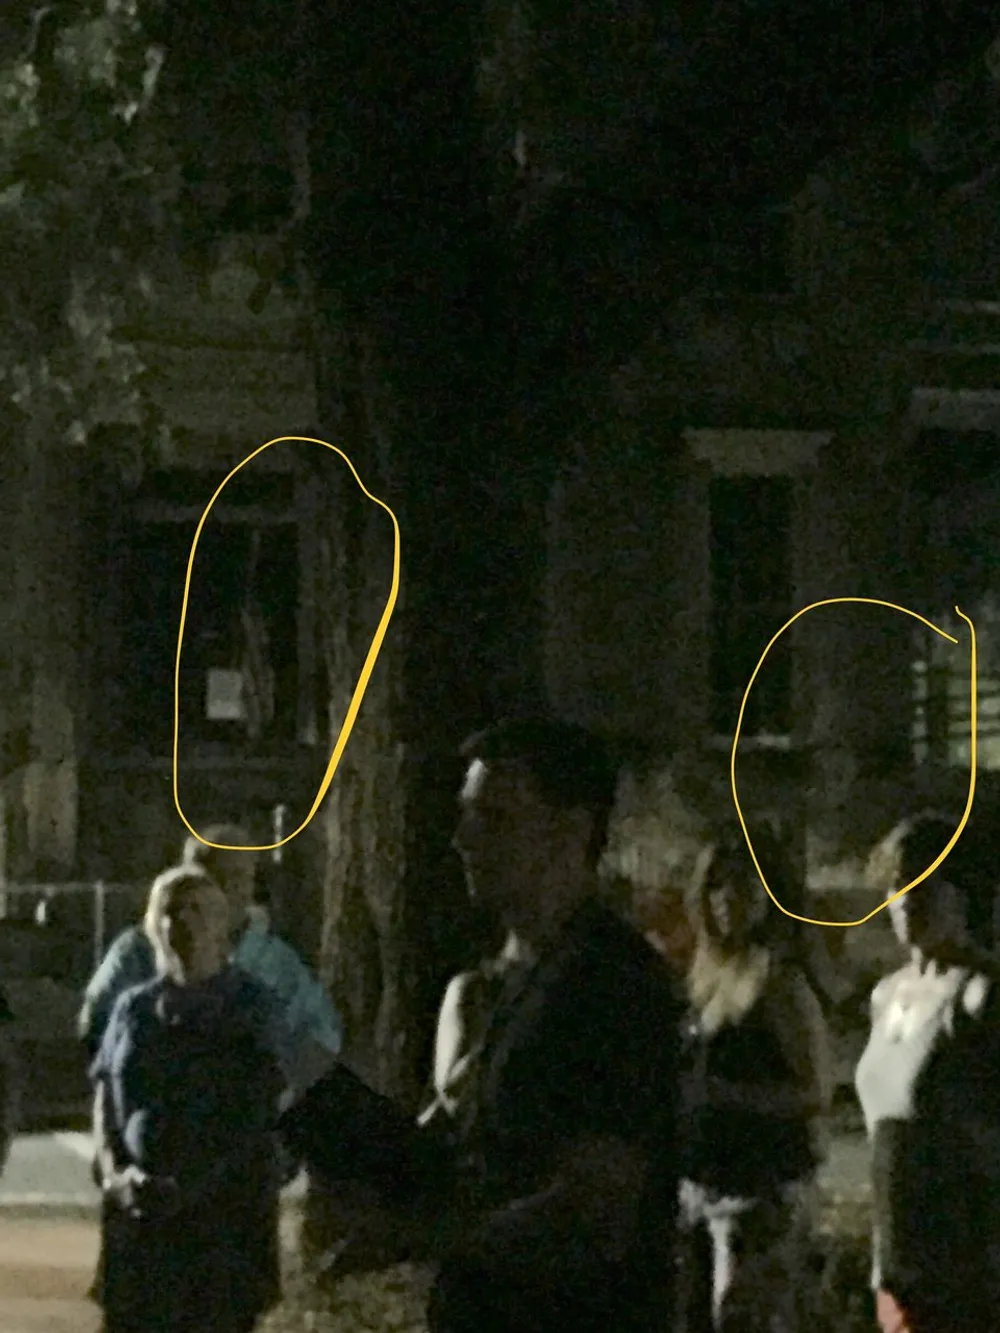 The image shows a group of people gathered at night with two areas highlighted by yellow ovals possibly indicating points of interest or anomalies within the scene